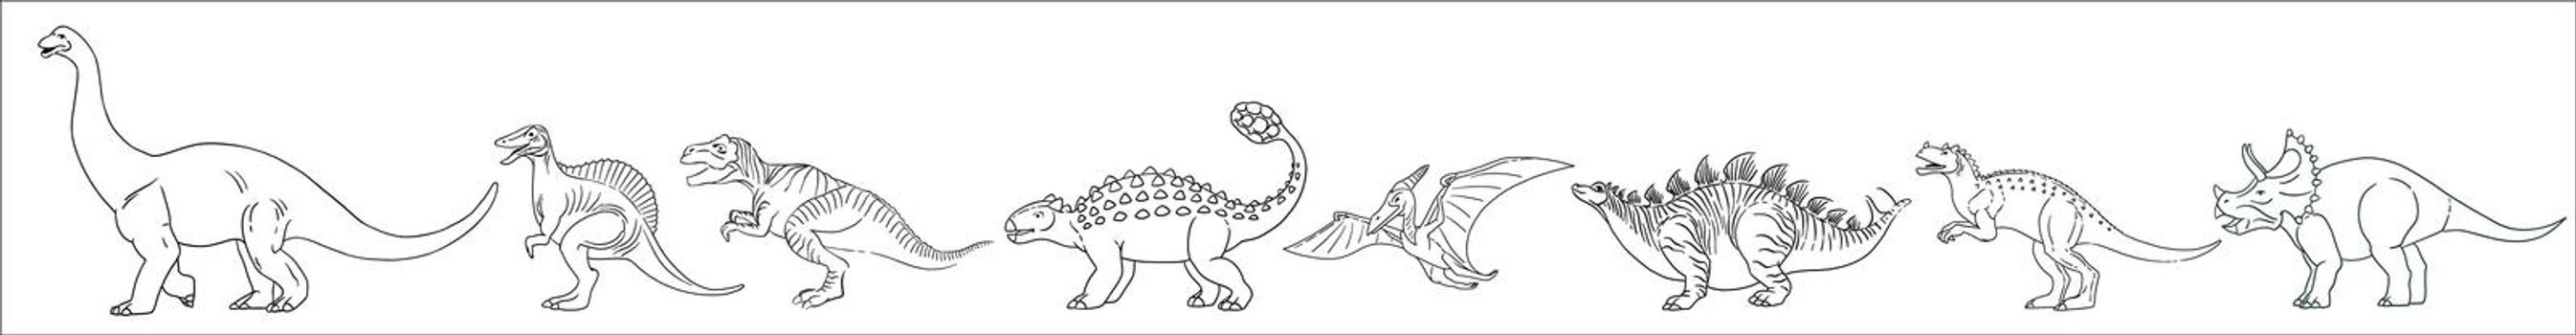 Brontosaurus, Pteranodon, triceratops, T-Rex, Spinosaurus, Stegosaurus, Ankylosaurus, Allosaurus. A set of dinosaurs in black and white in a horizontal row.